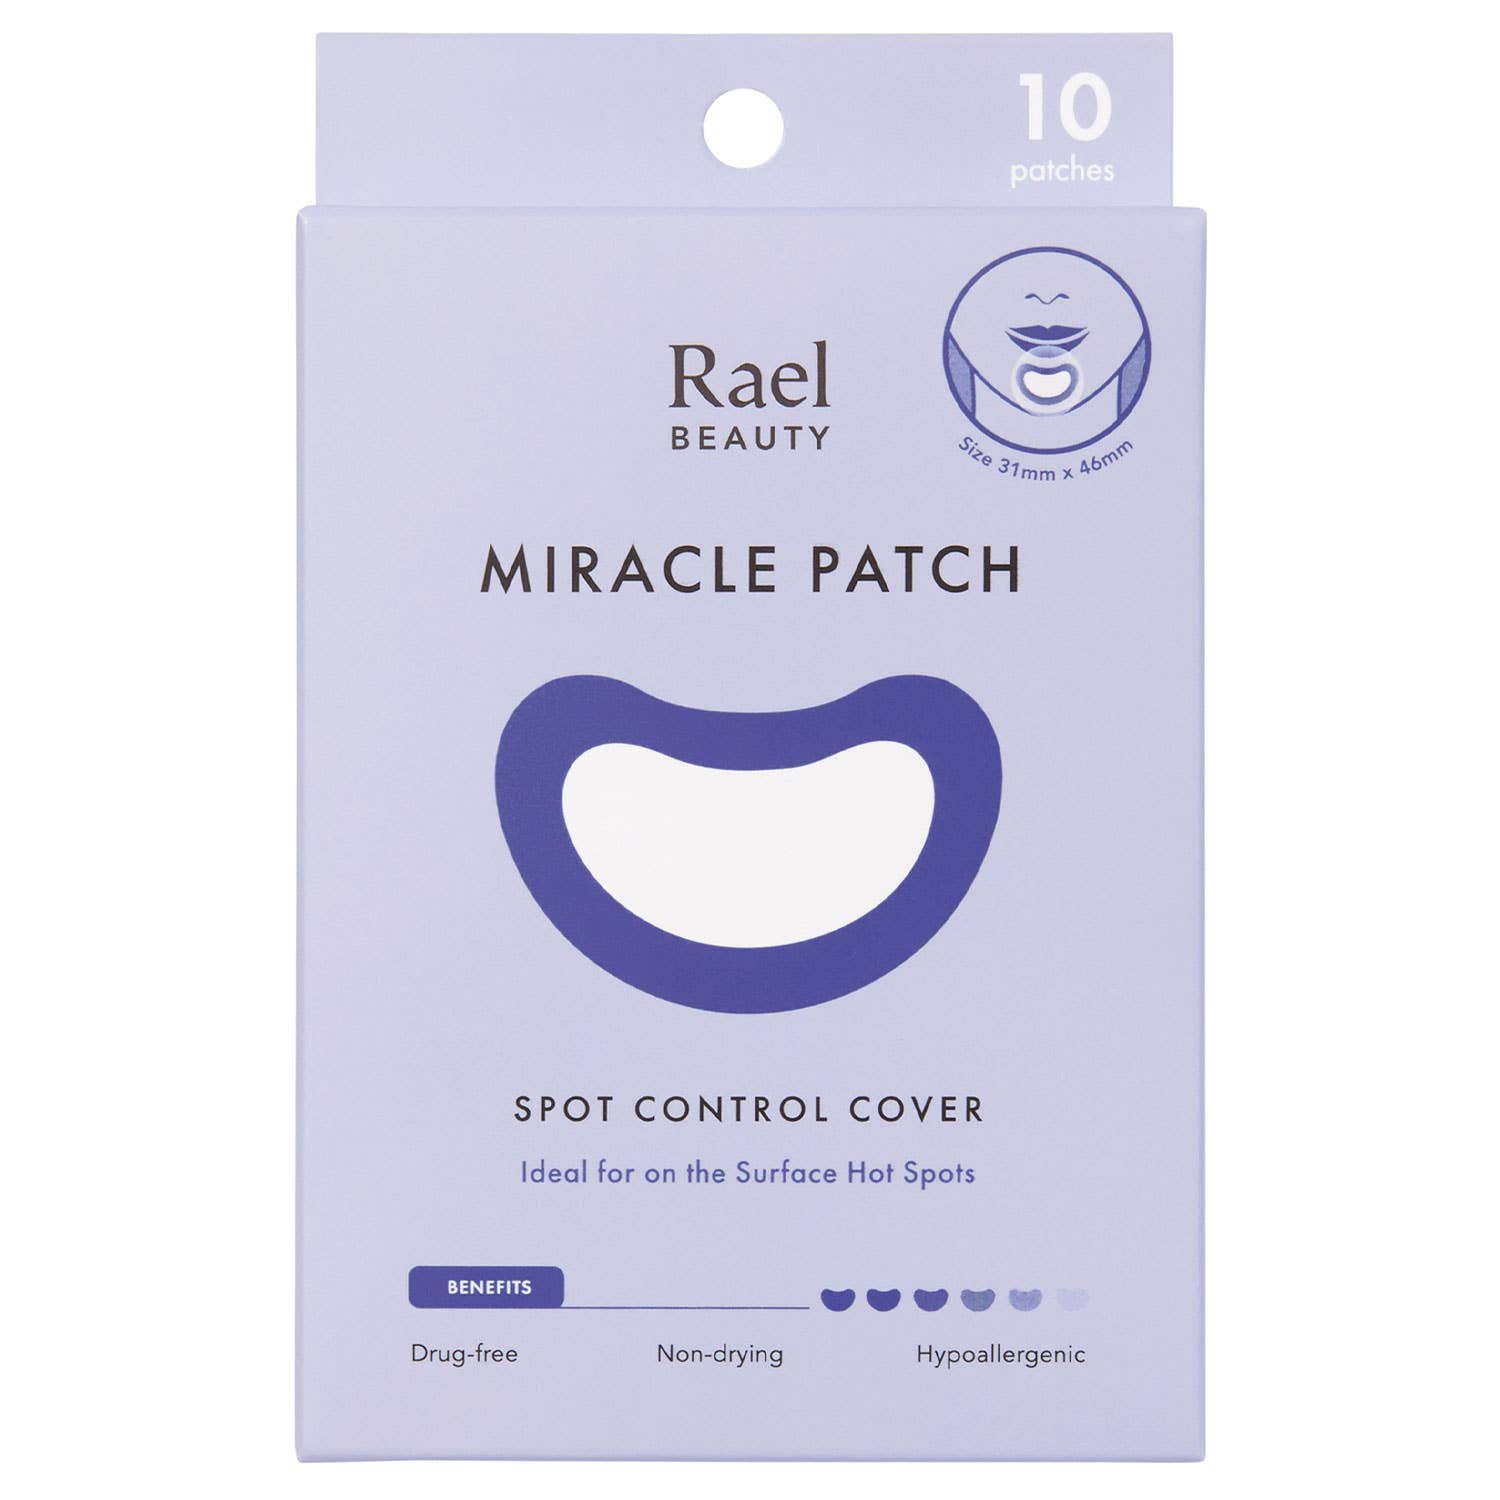 Miracle Patch Spot Control Cover Pimple Patch by Rael. Hot spot acne patch. Overnight acne patch. Patch for blemishes. Get rid of pimple overnight